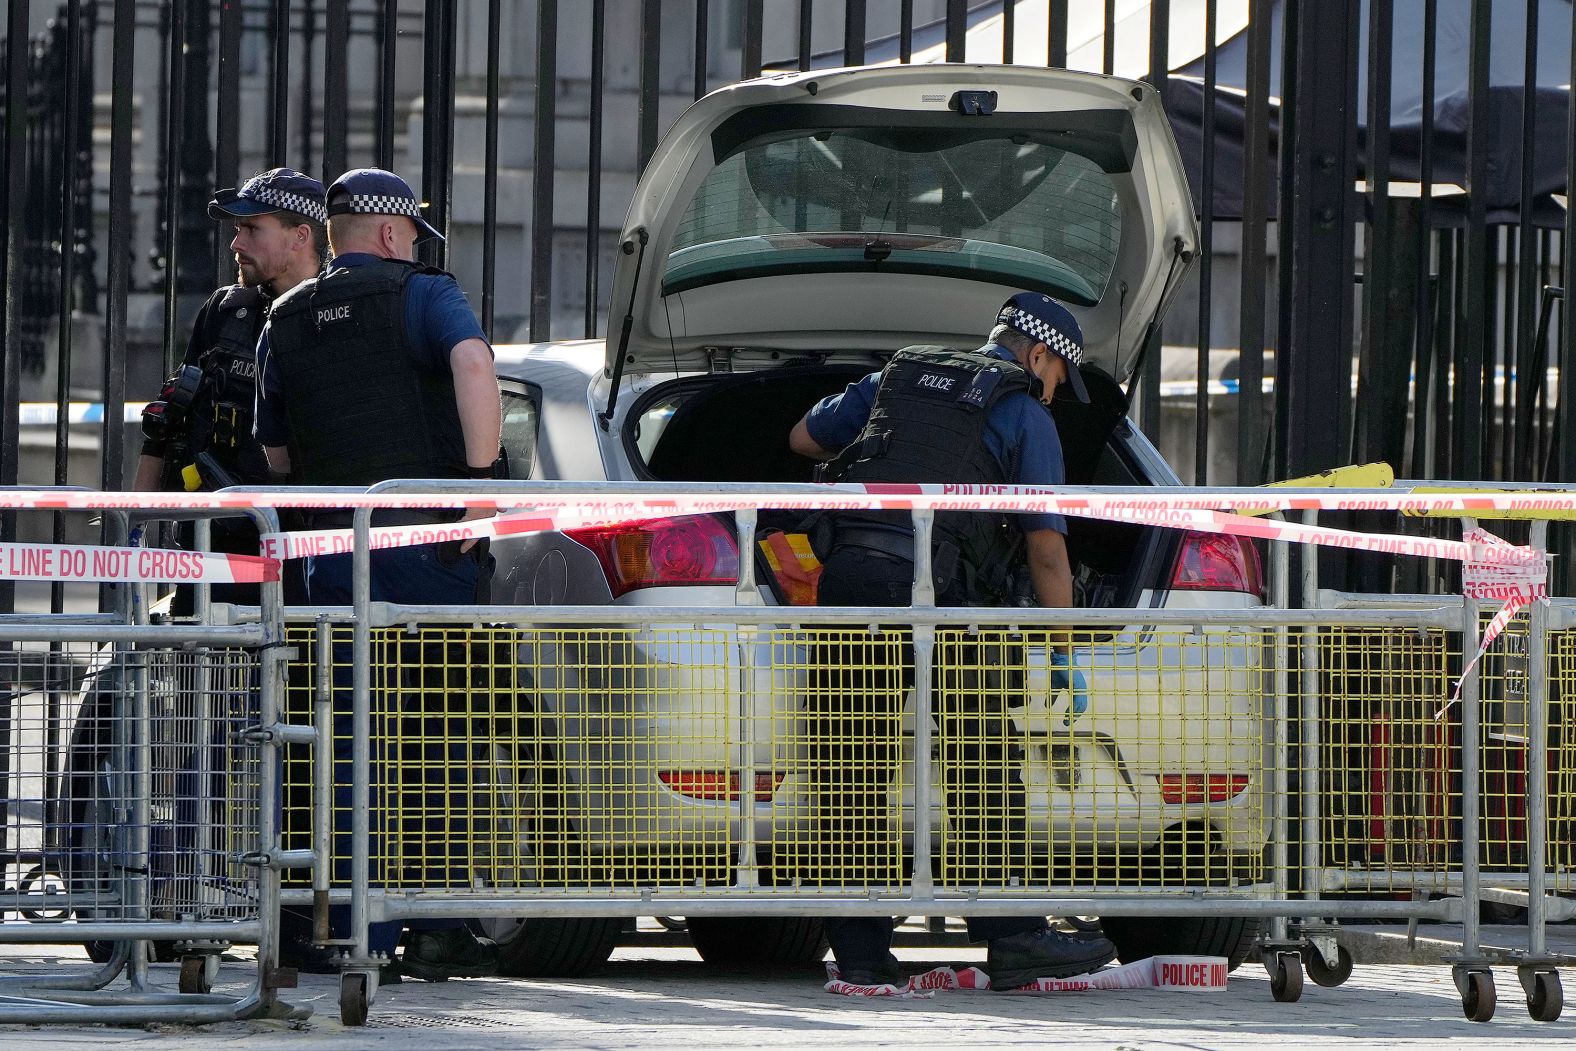 Police in London work at the scene after <a href="index.php?page=&url=https%3A%2F%2Fwww.cnn.com%2F2023%2F05%2F25%2Fuk%2Fdowning-street-car-crash-gbr-intl%2Findex.html" target="_blank">a car was driven at the gates of Downing Street</a>, the official residence of the UK prime minister, on Thursday, May 25. A man was arrested and there were no reports of any injuries.